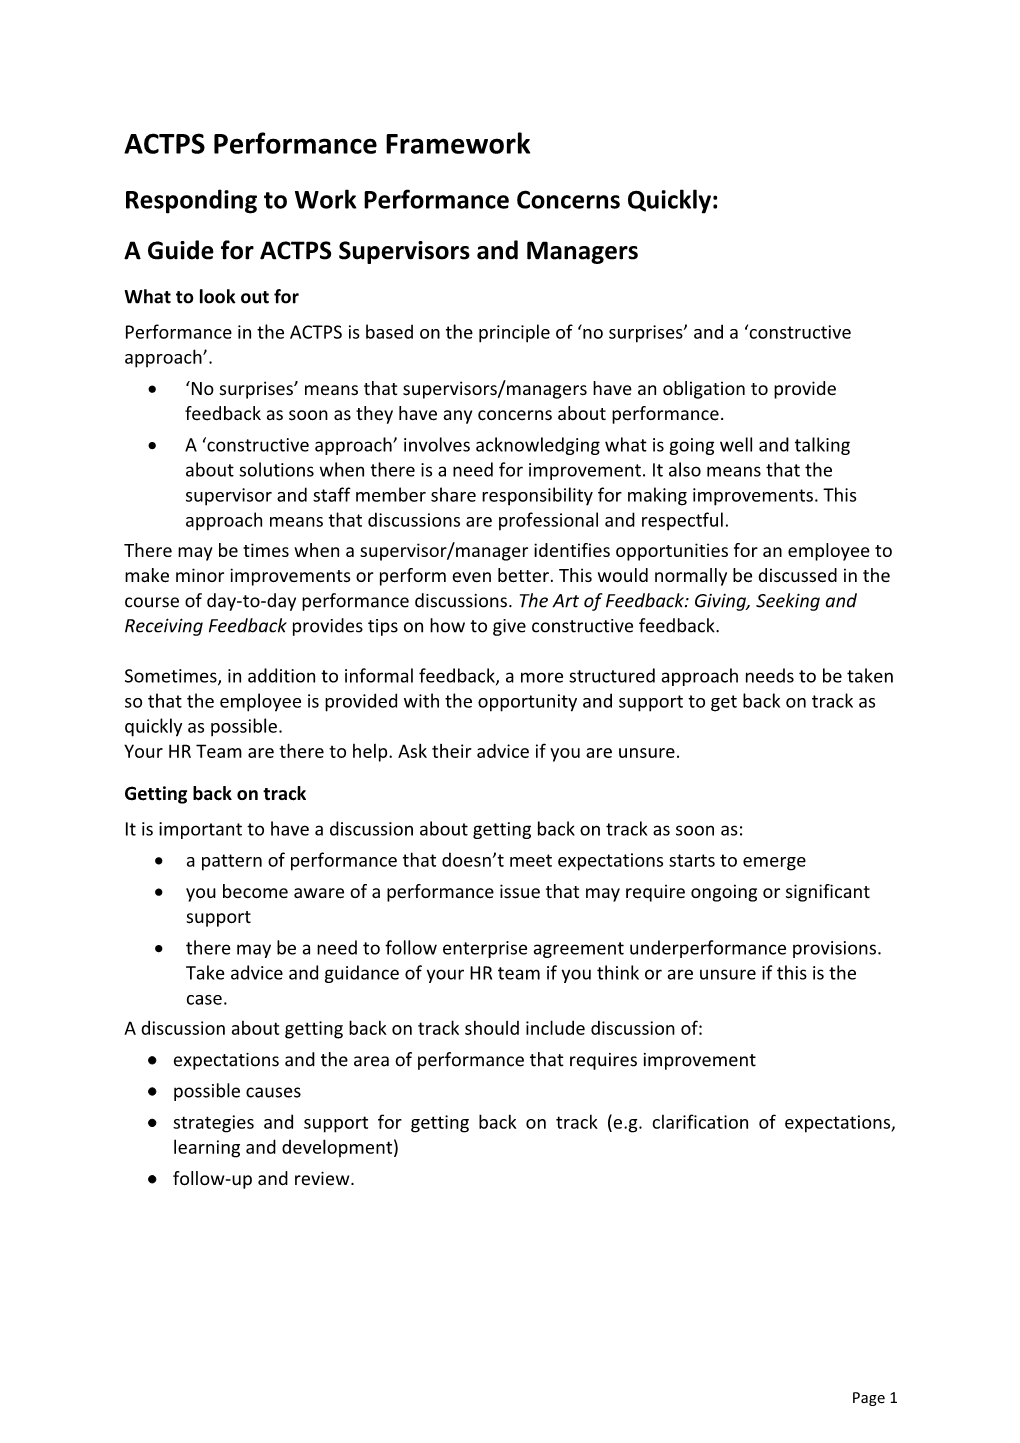 Responding to Work Performance Concerns Quickly: a Guide for ACTPS Supervisors and Managers